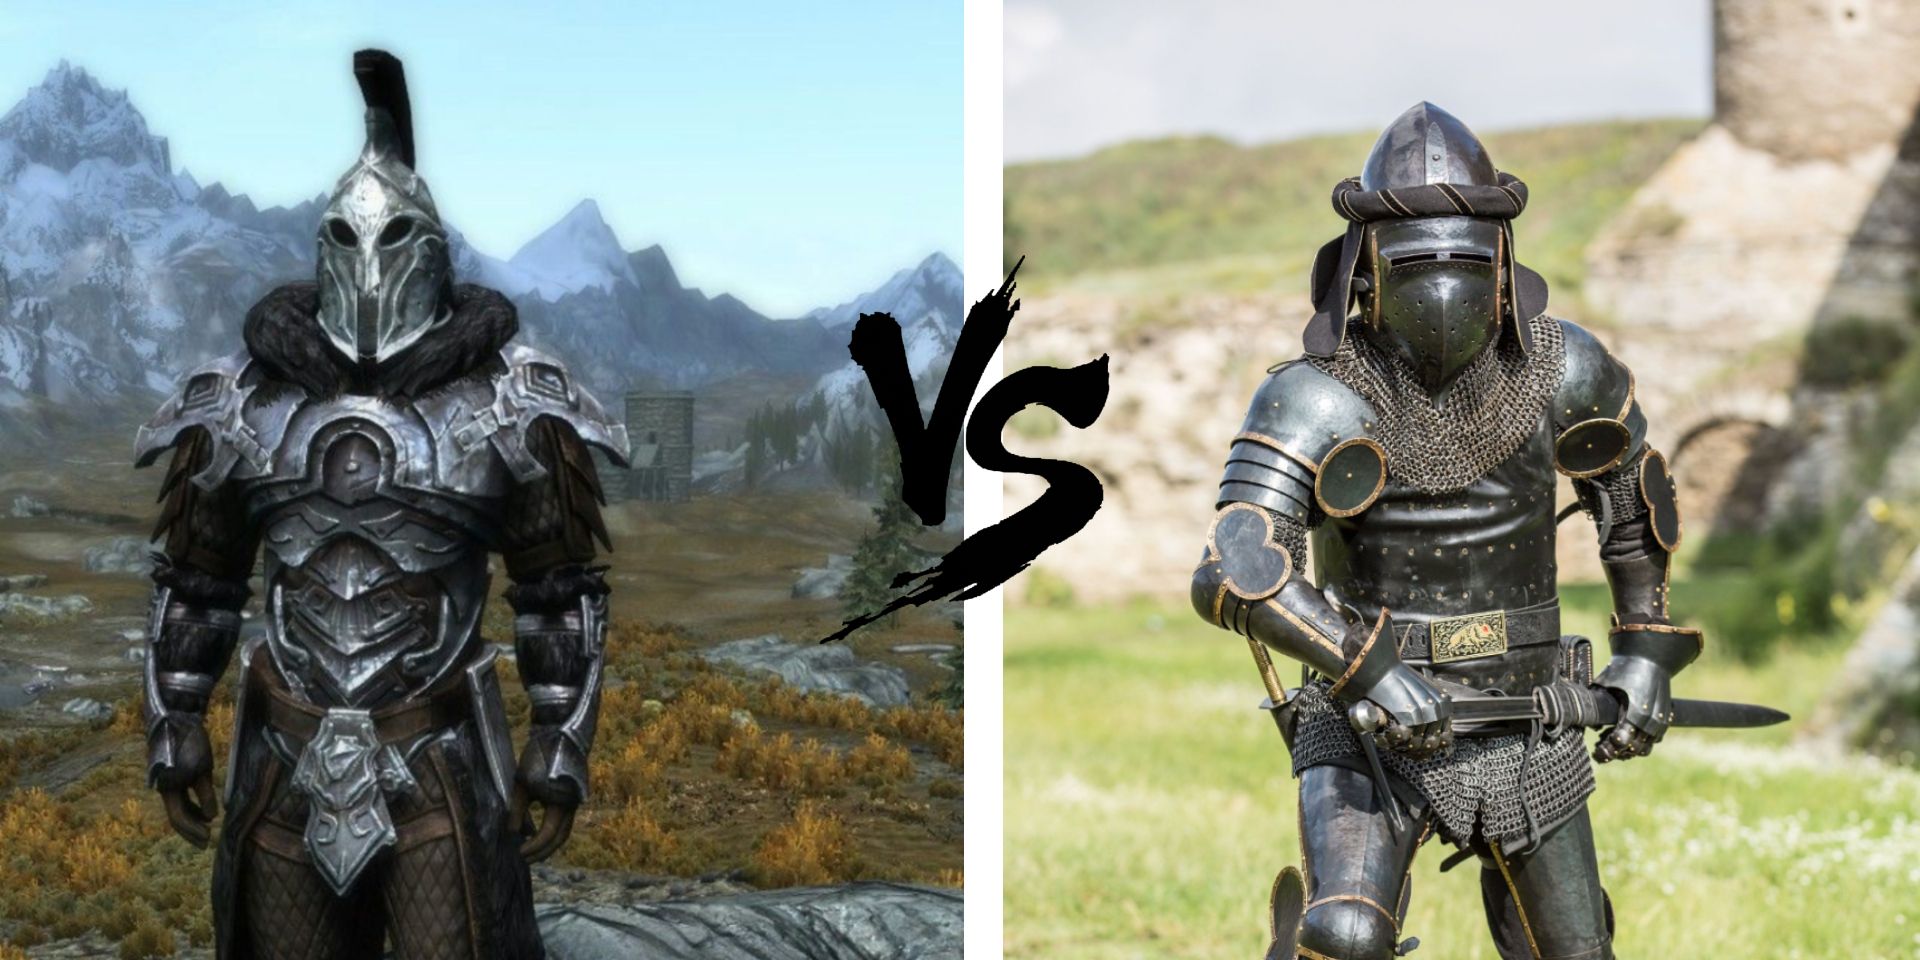 How does 'realistic' fantasy armor differ from real historical